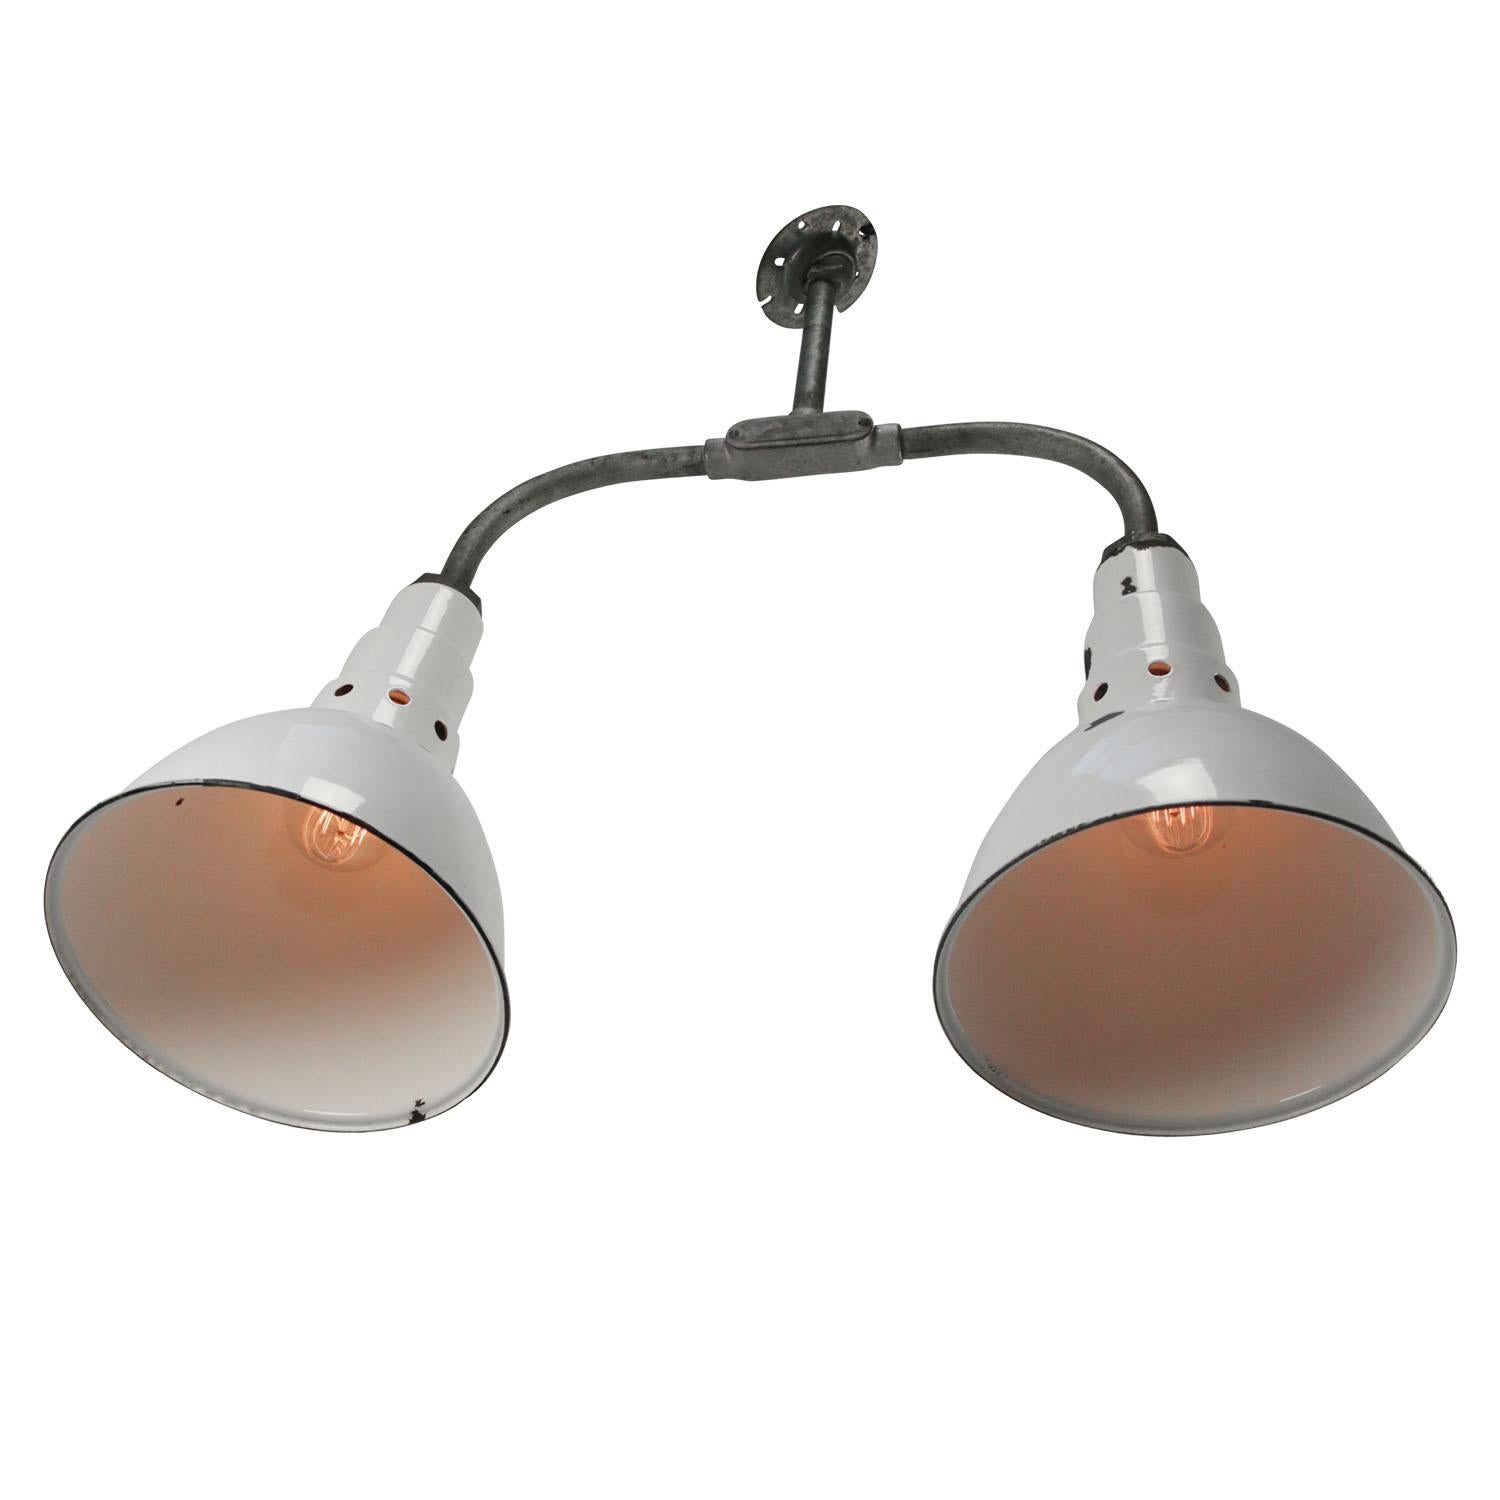 Double Factory American hanging lights. White enamel. White interior.
Cast iron frame with 2 white enamel shades

Weight 4.00 kg / 8.8 lb

Priced per individual item. All lamps have been made suitable by international standards for incandescent